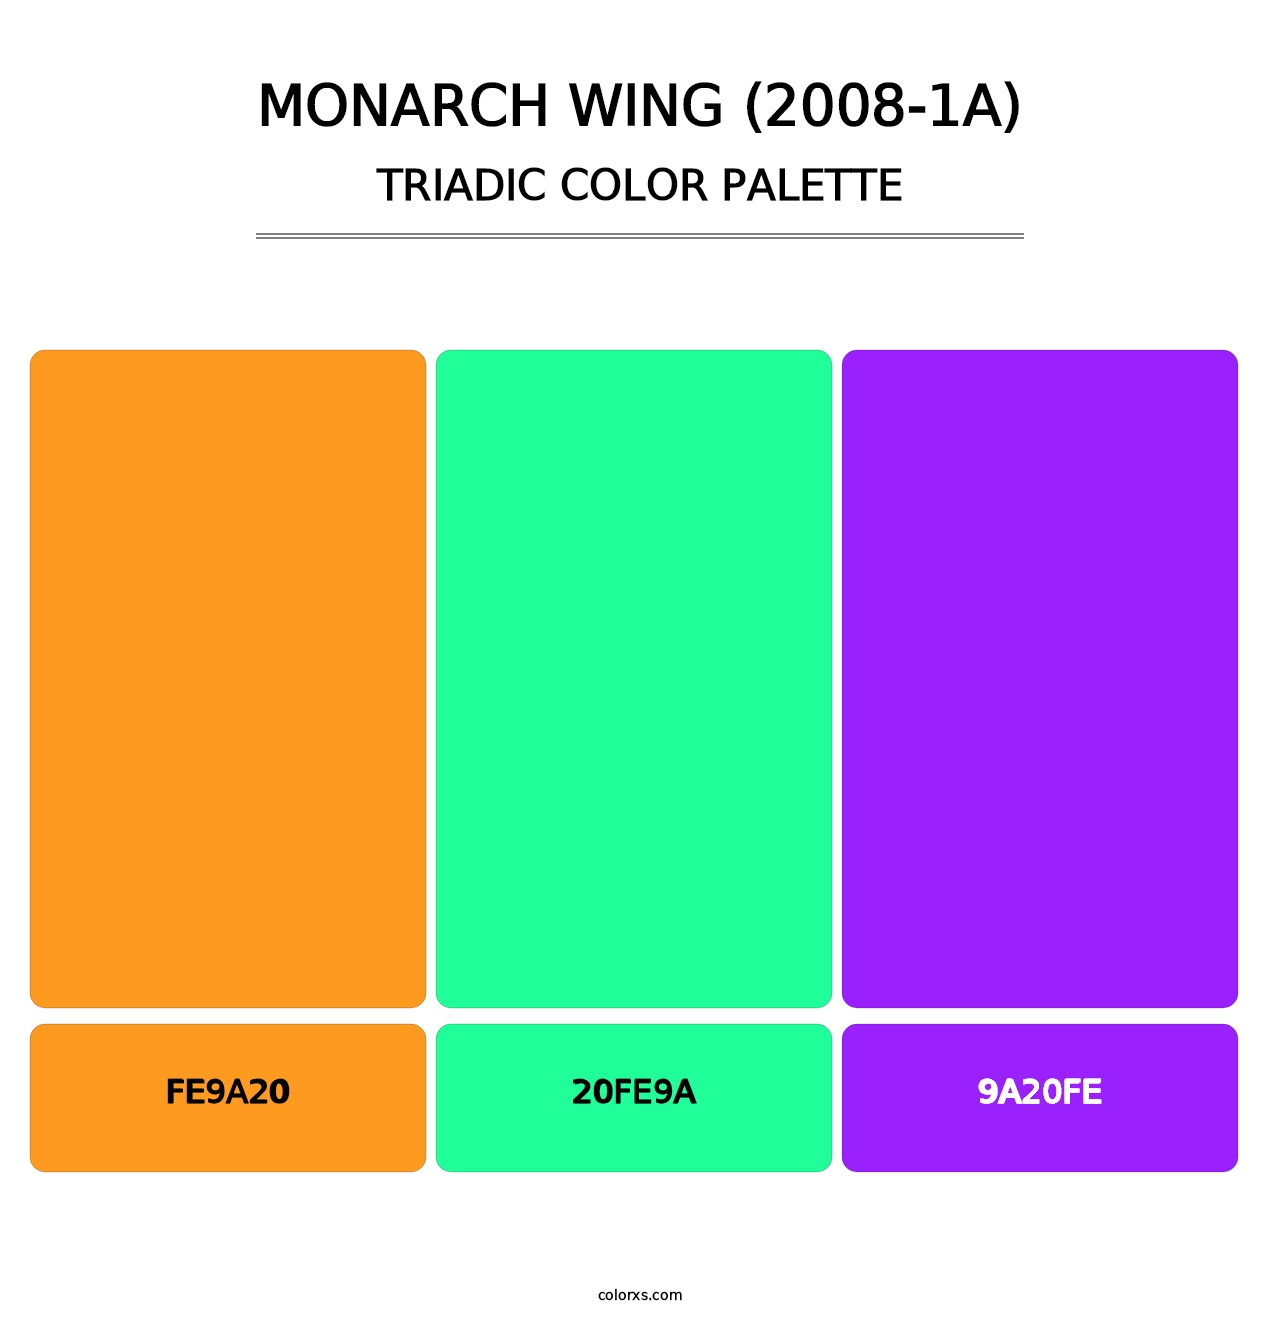 Monarch Wing (2008-1A) - Triadic Color Palette